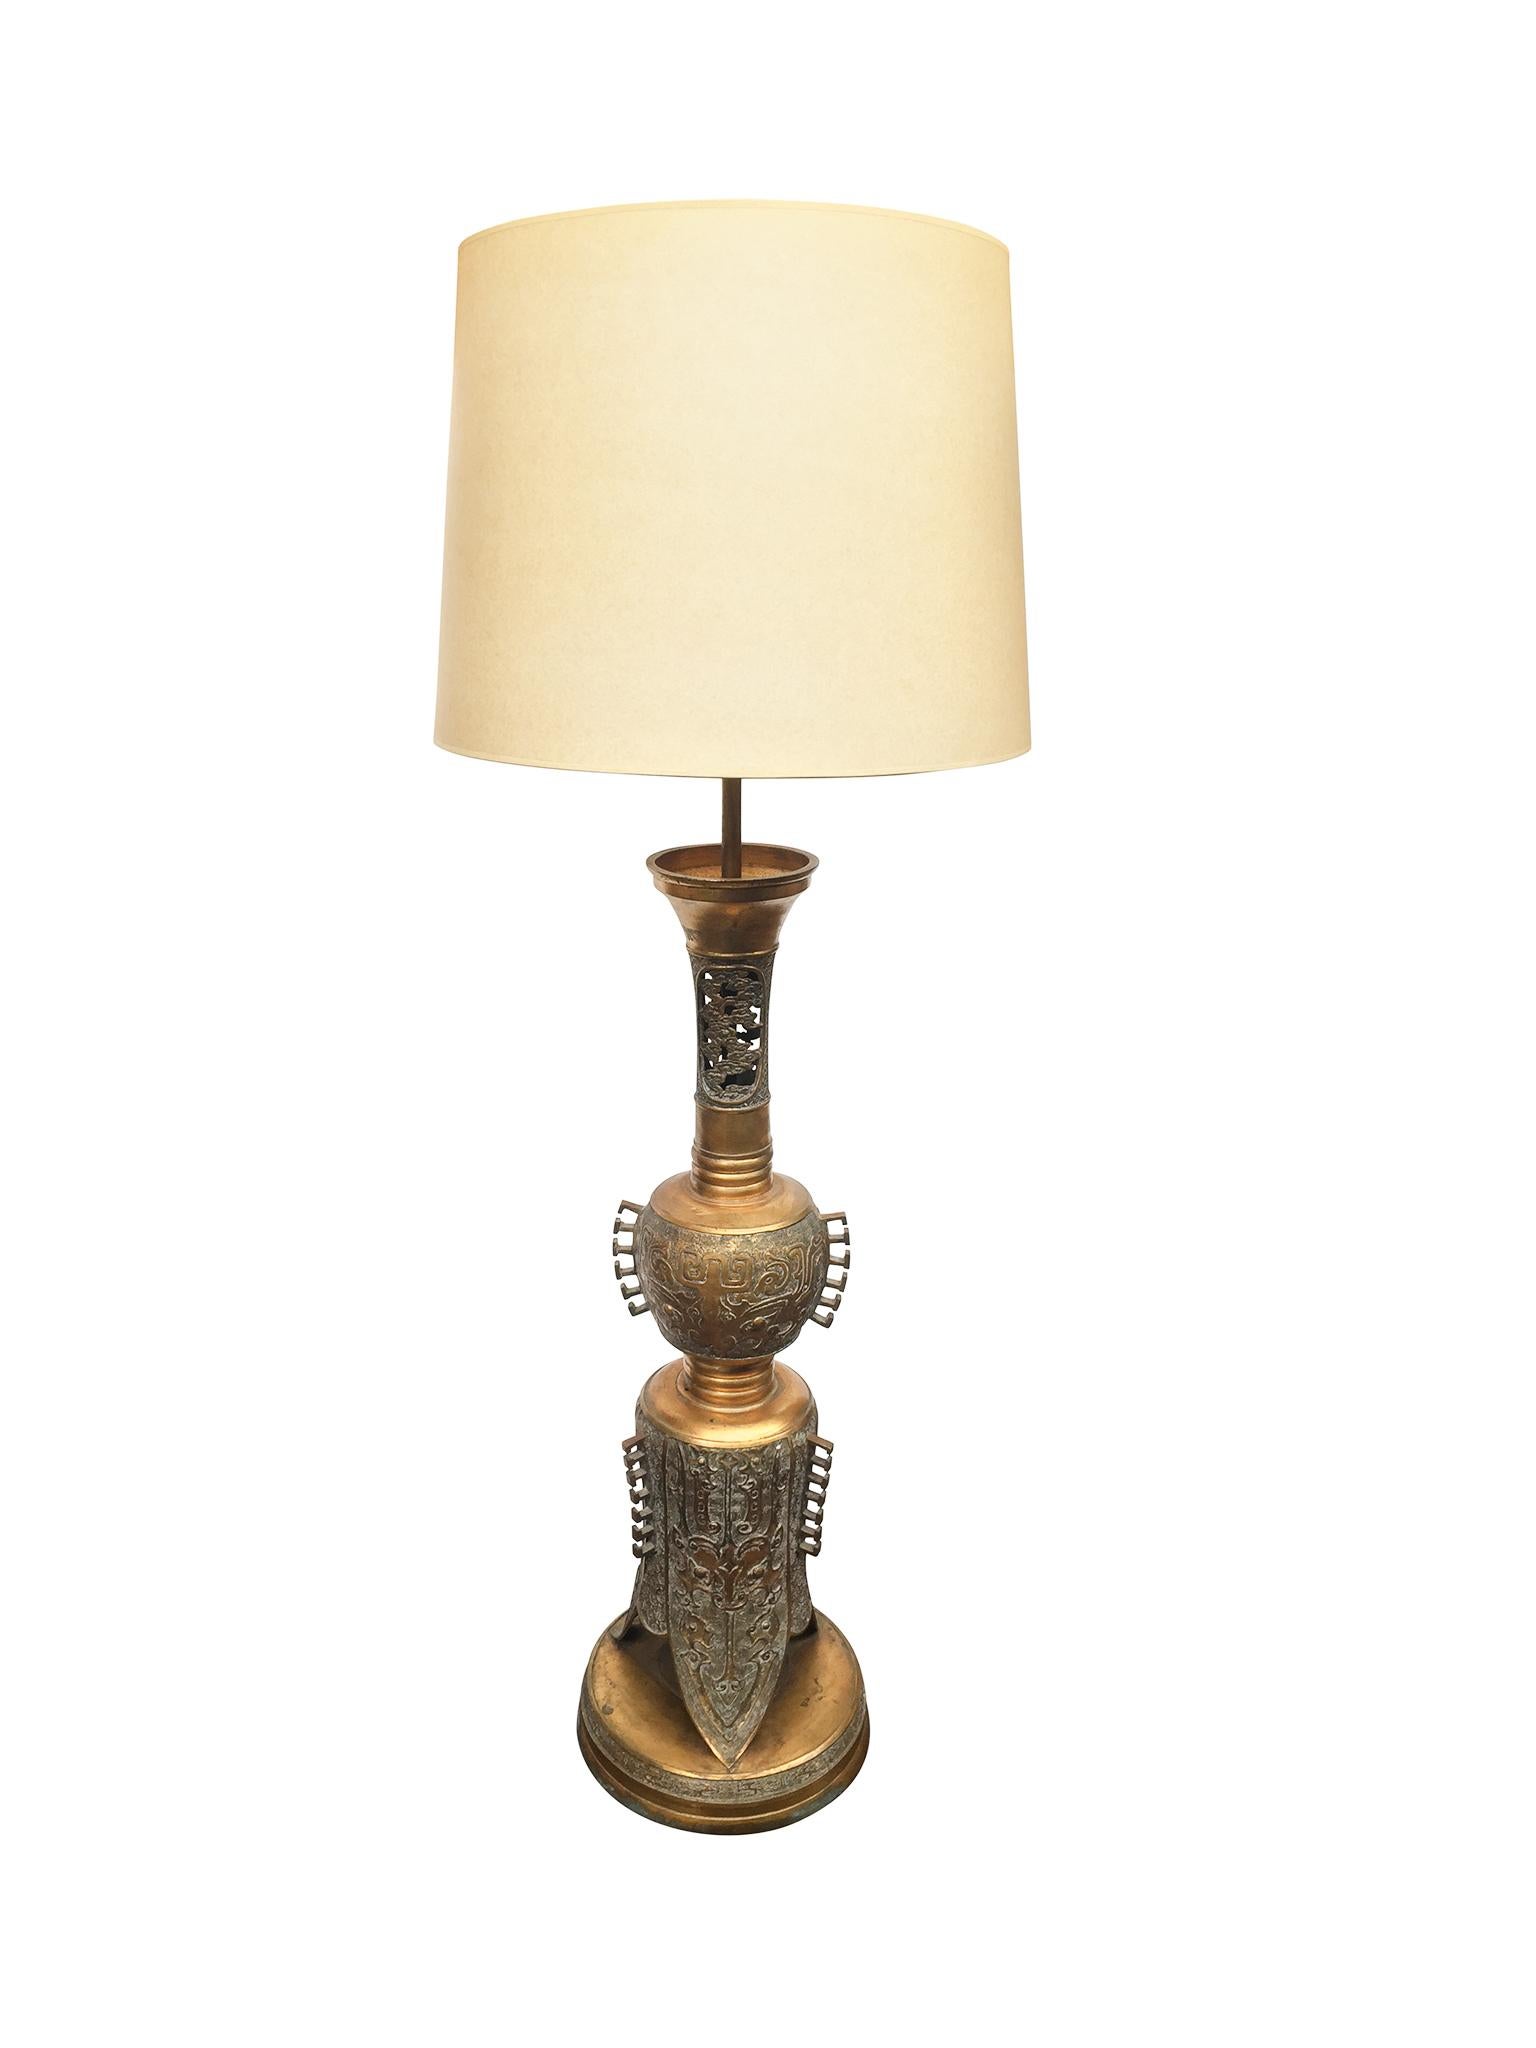 This 1940s table lamp is comprised of a gold-hued brass candelabra body with intricate embossed and incised patterns. The style and use of a traditional candlestick form as a table lamp are reminiscent of the extravagant, but nevertheless stunning,